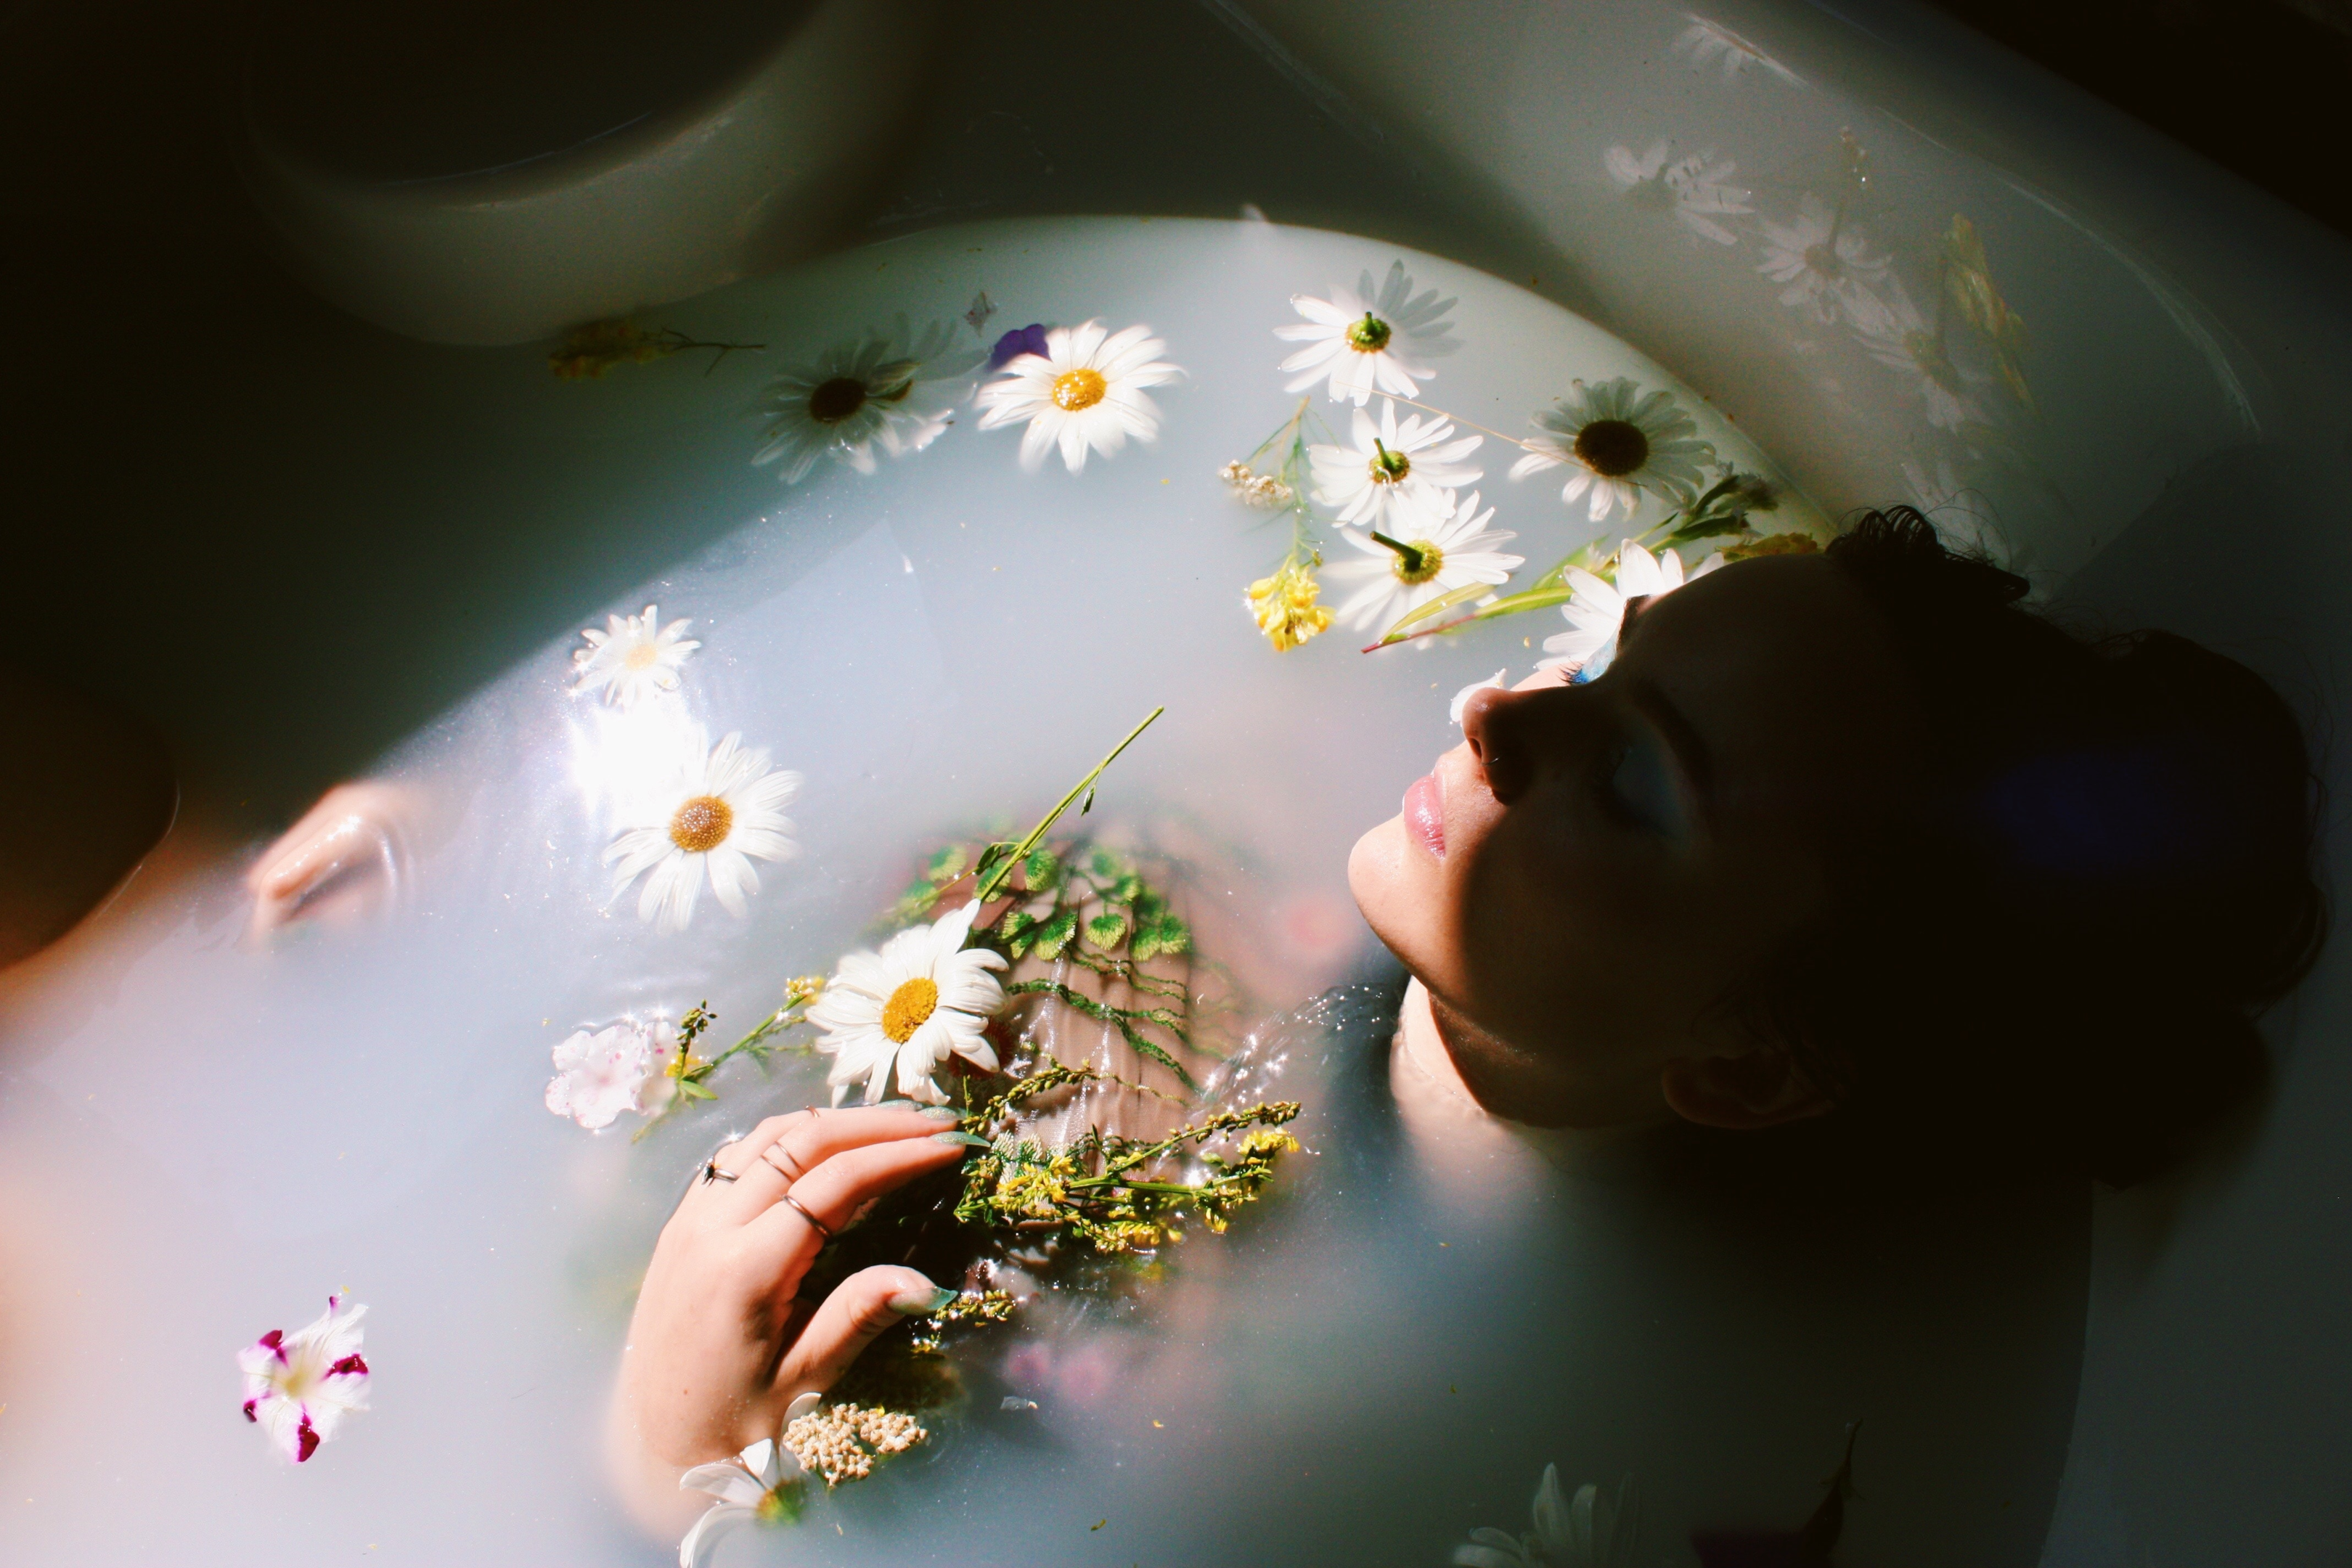 A self-love bath offers transformative reflection and self-care. Source: Unsplash, Isi Parente .